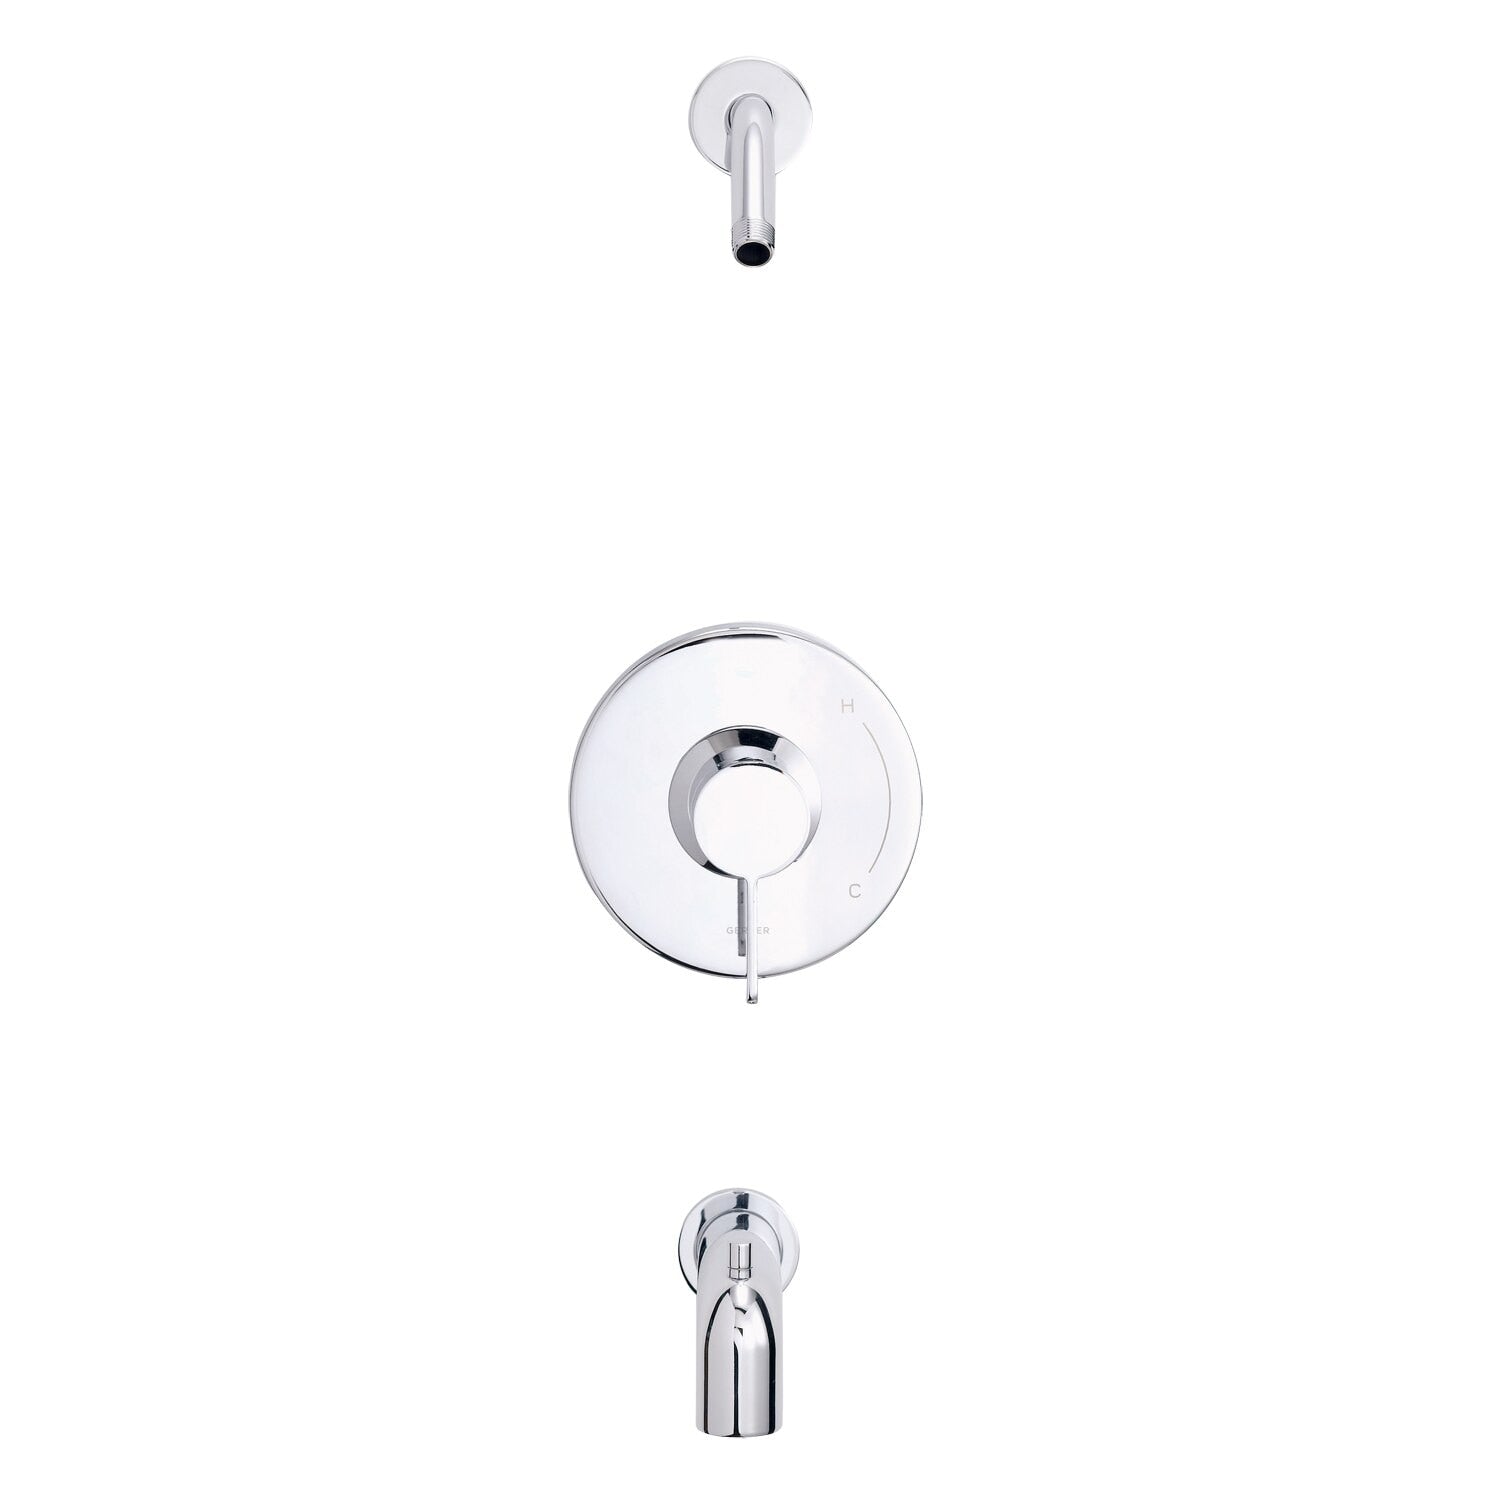 Danze by Gerber Amalfi 1H Tub and Shower Trim Kit and Treysta Cartridge w/ Diverter on Spout Less Showerhead